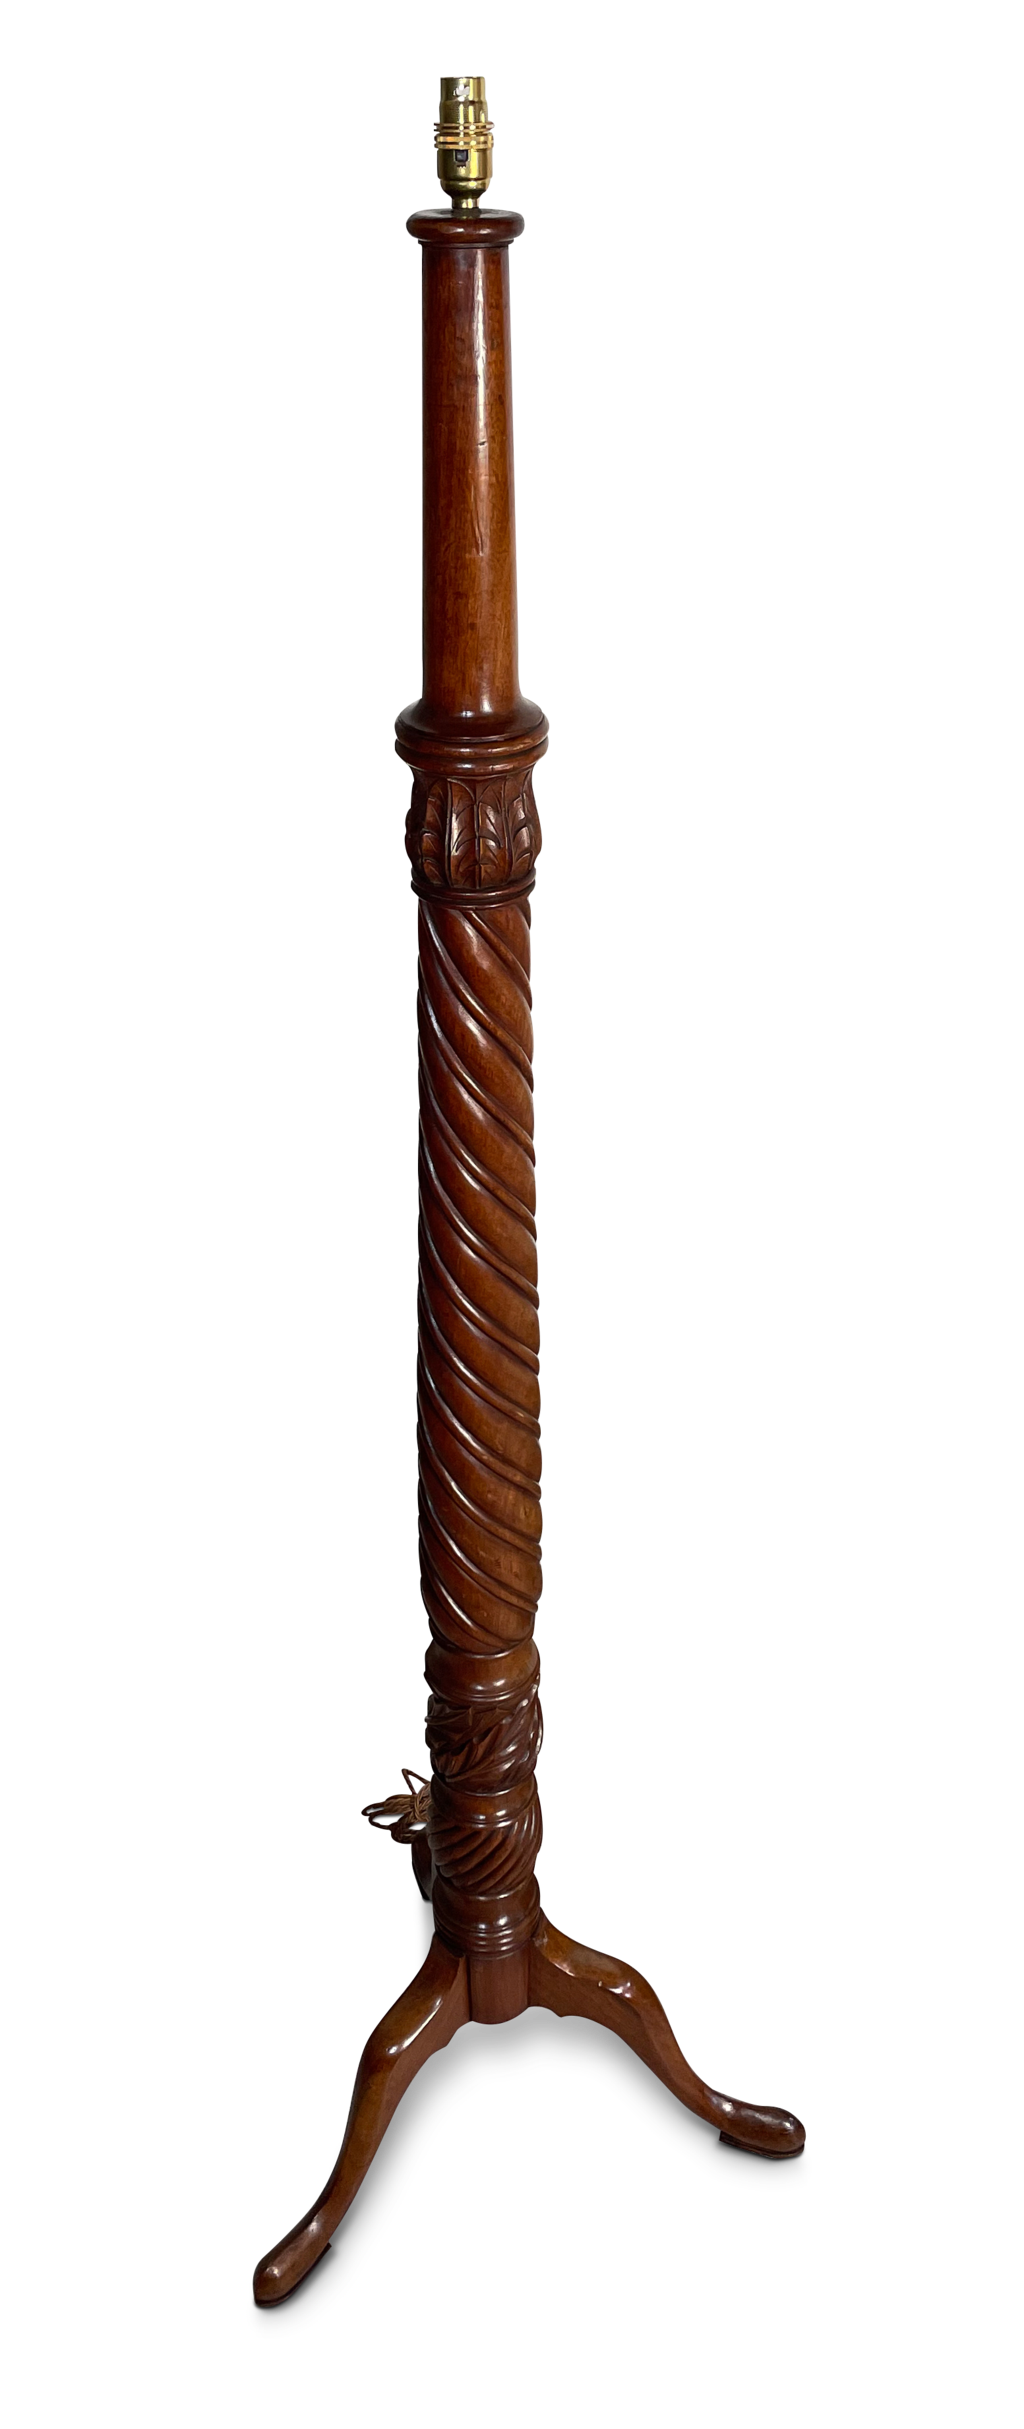 Turned and Carved Walnut Column Tripod Floor Lamp